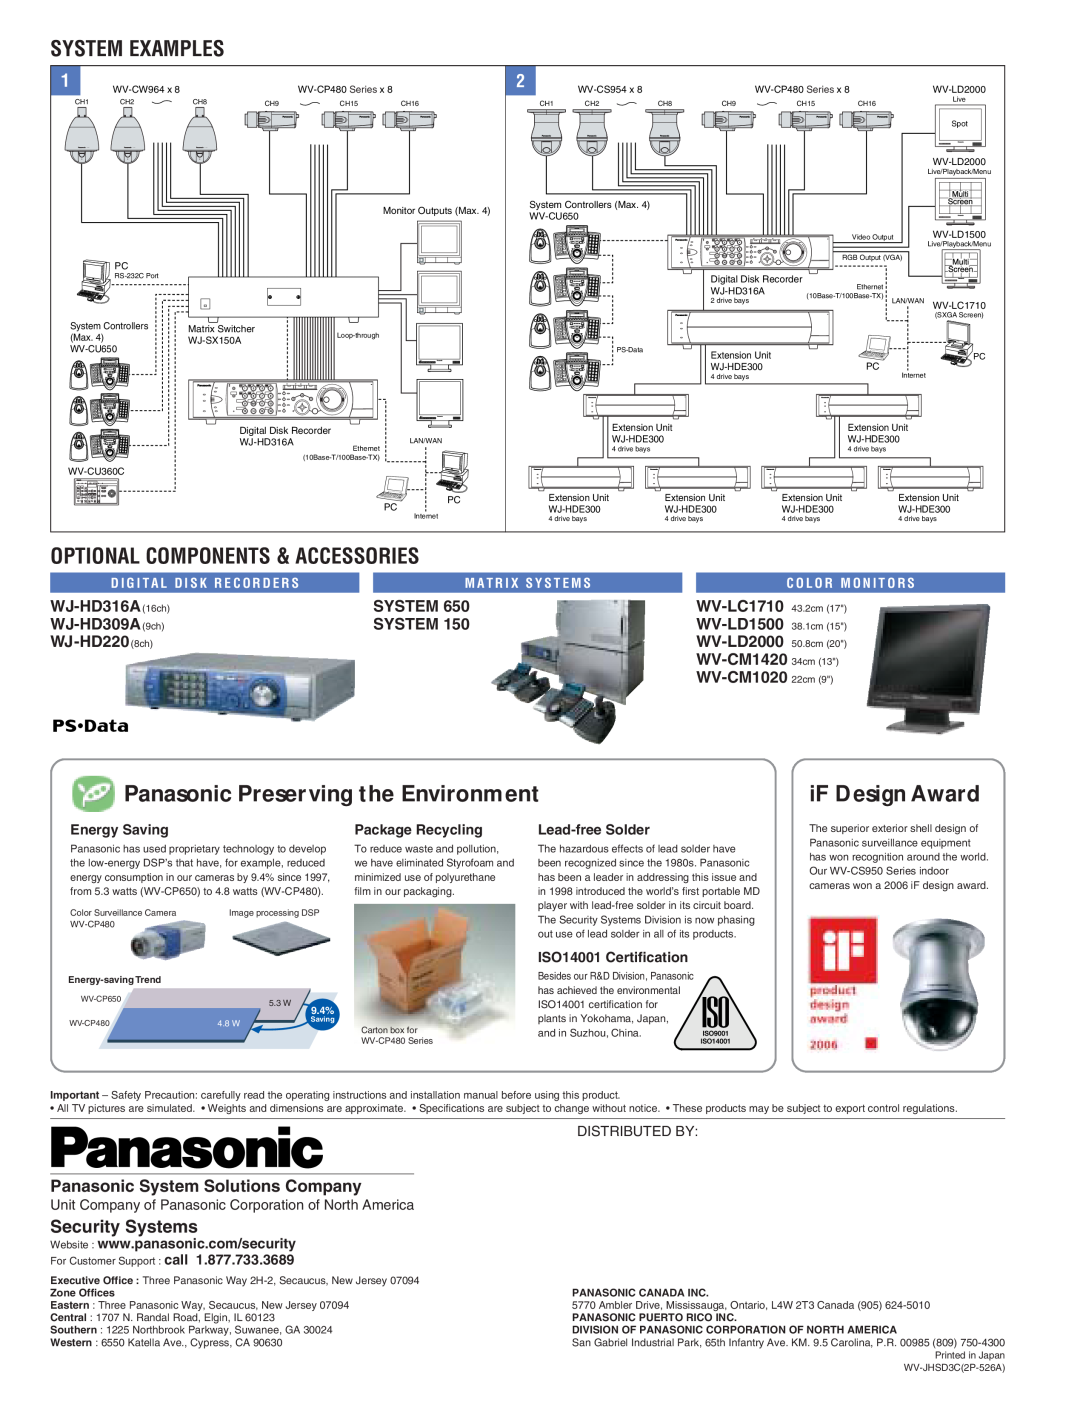 Panasonic III System Examples, Optional Components & Accessories, Panasonic Preserving the Environment, iF Design Award 